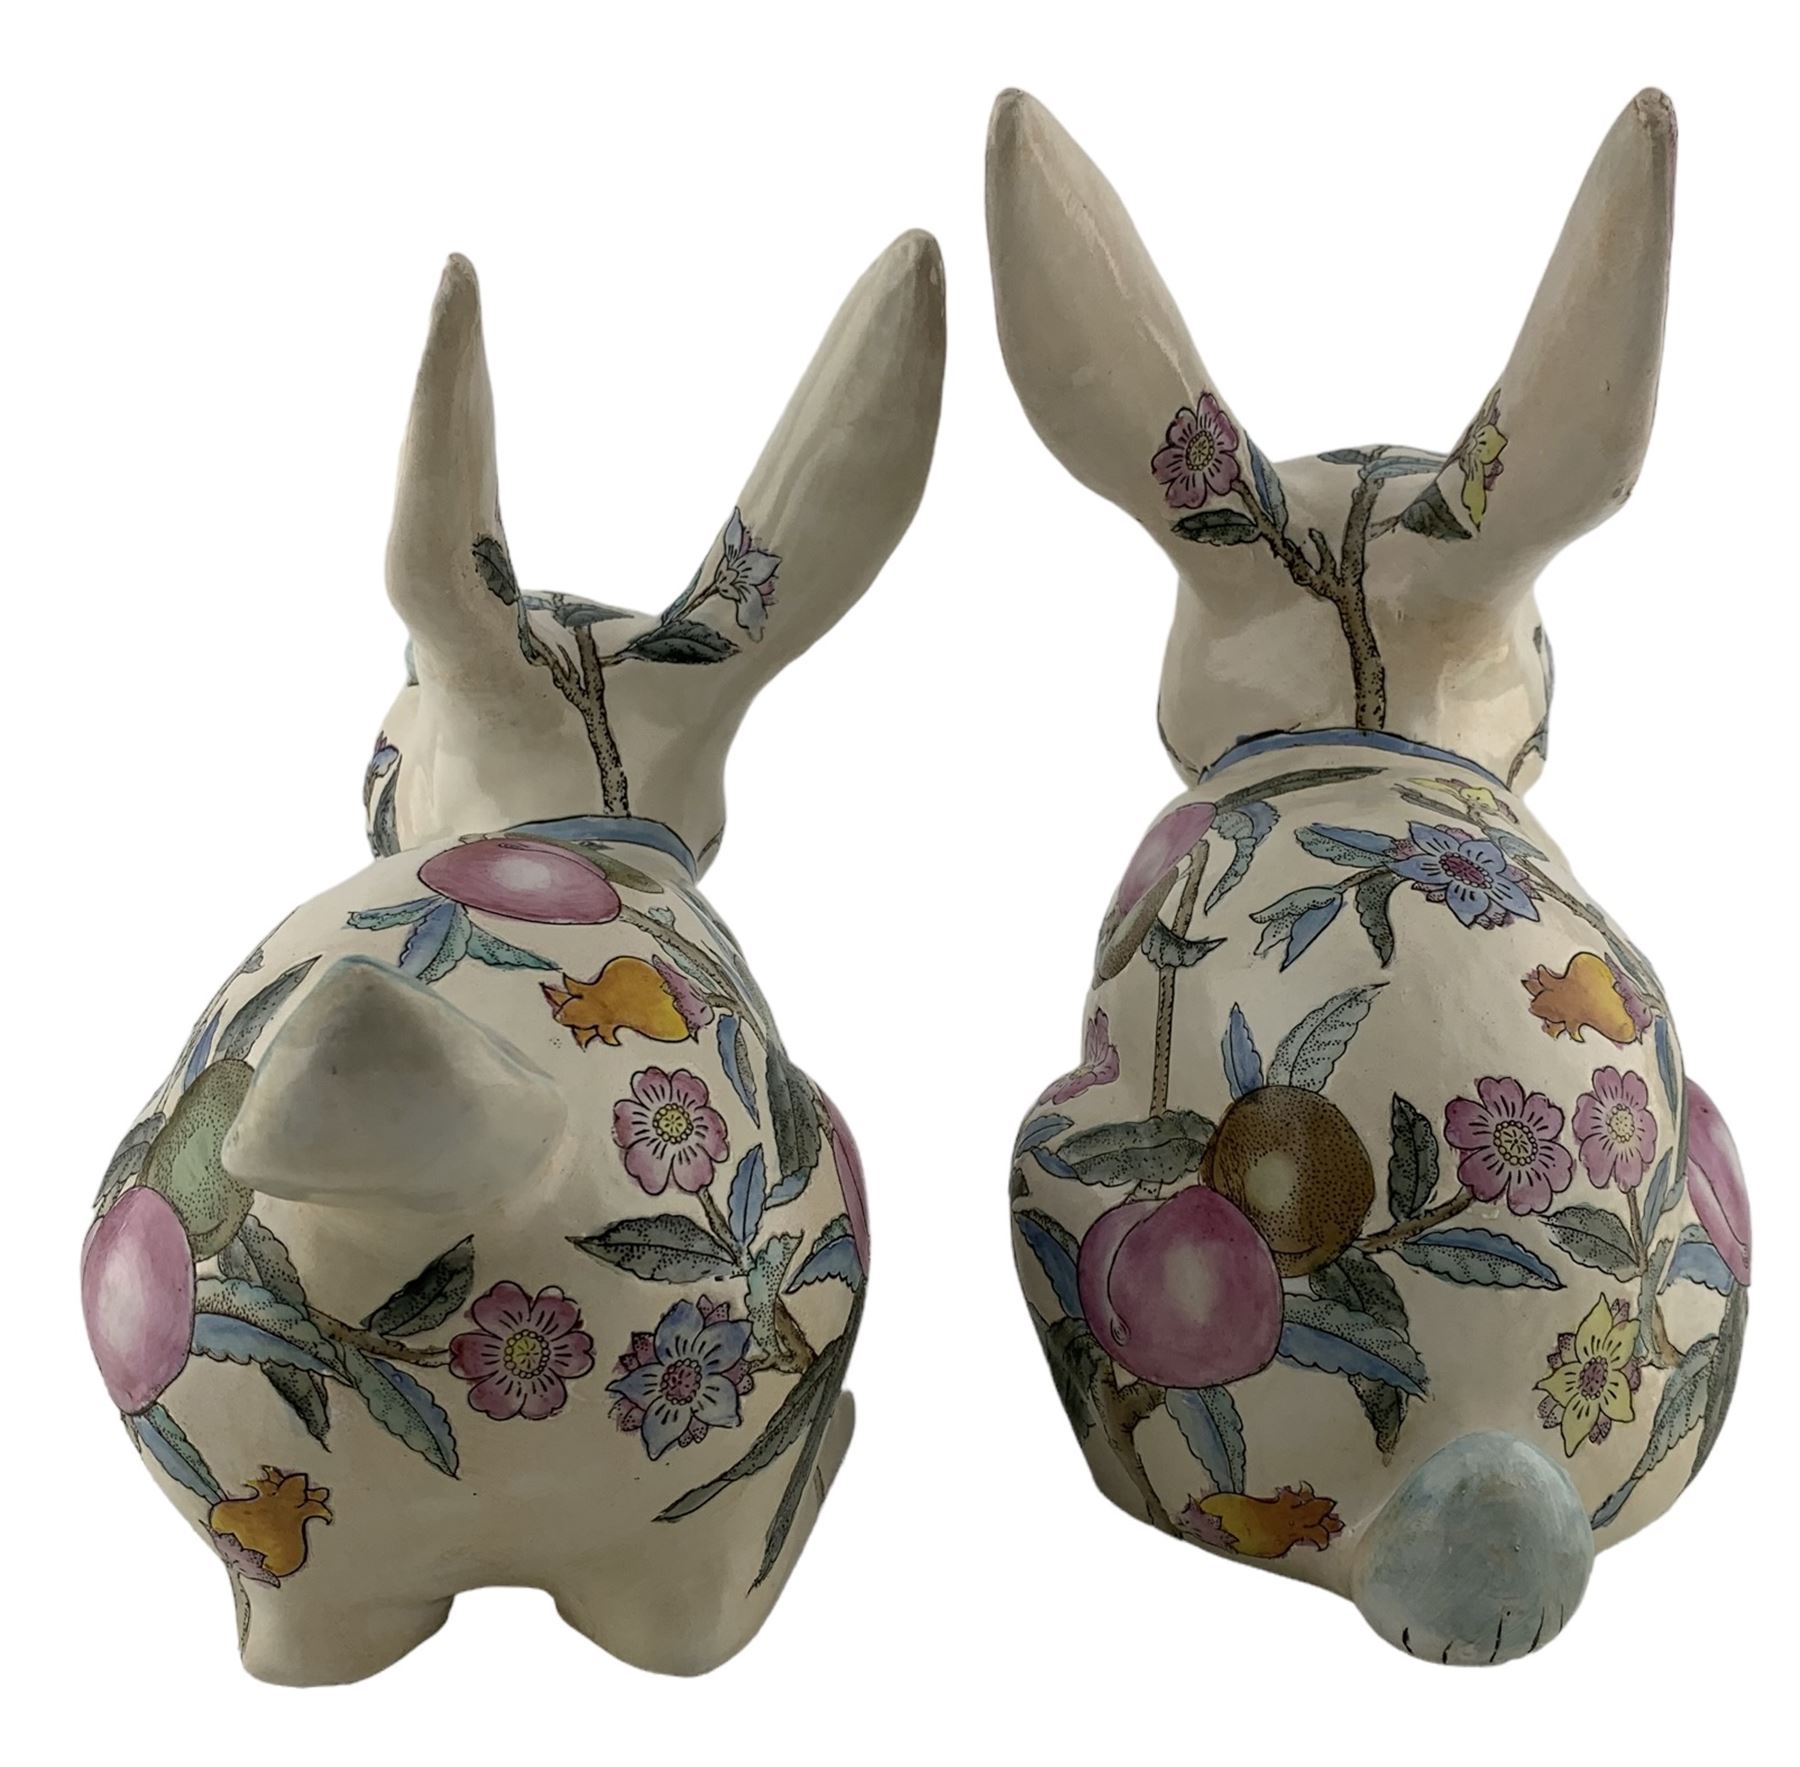 Pair of mid 20th century Chinese pottery Rabbits - Image 2 of 6